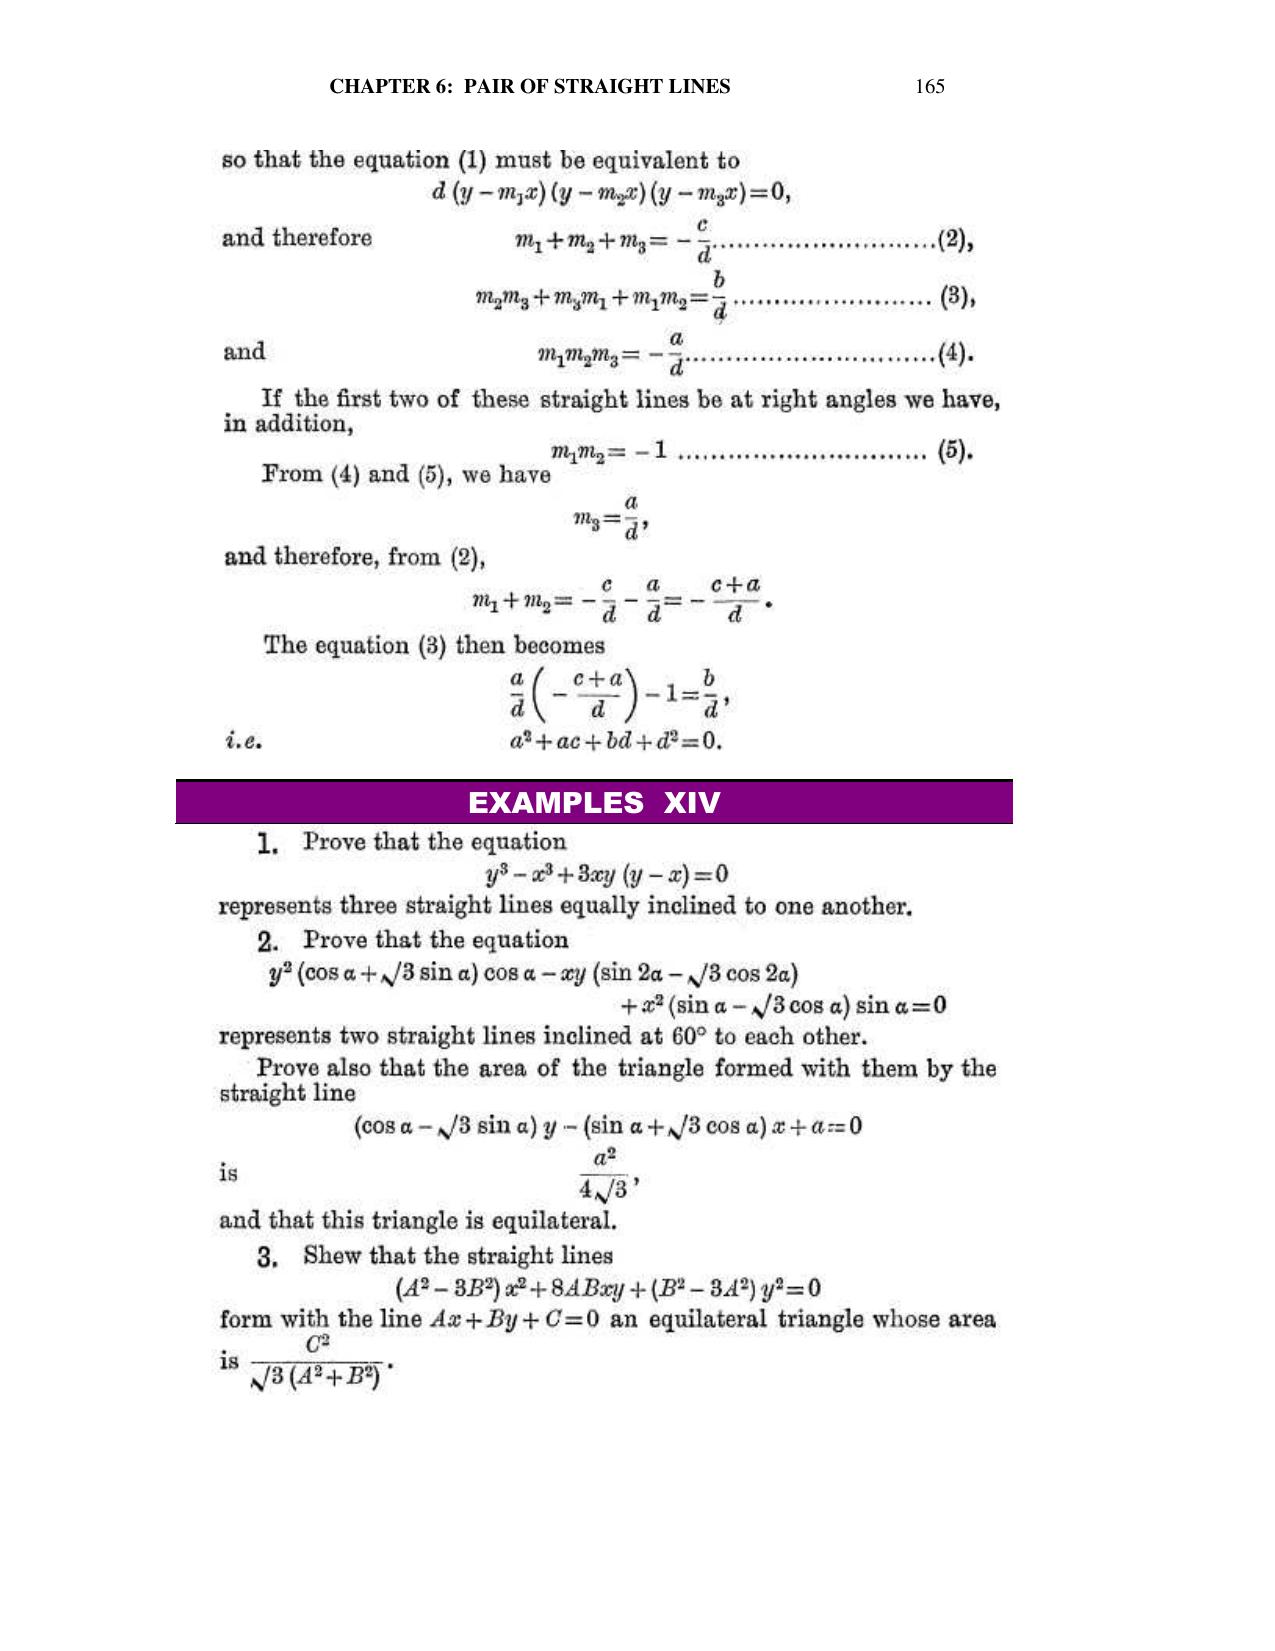 Chapter 6: On Equations Representing Two or More Straight Lines - SL Loney Solutions: The Elements of Coordinate Geometry - Page 26